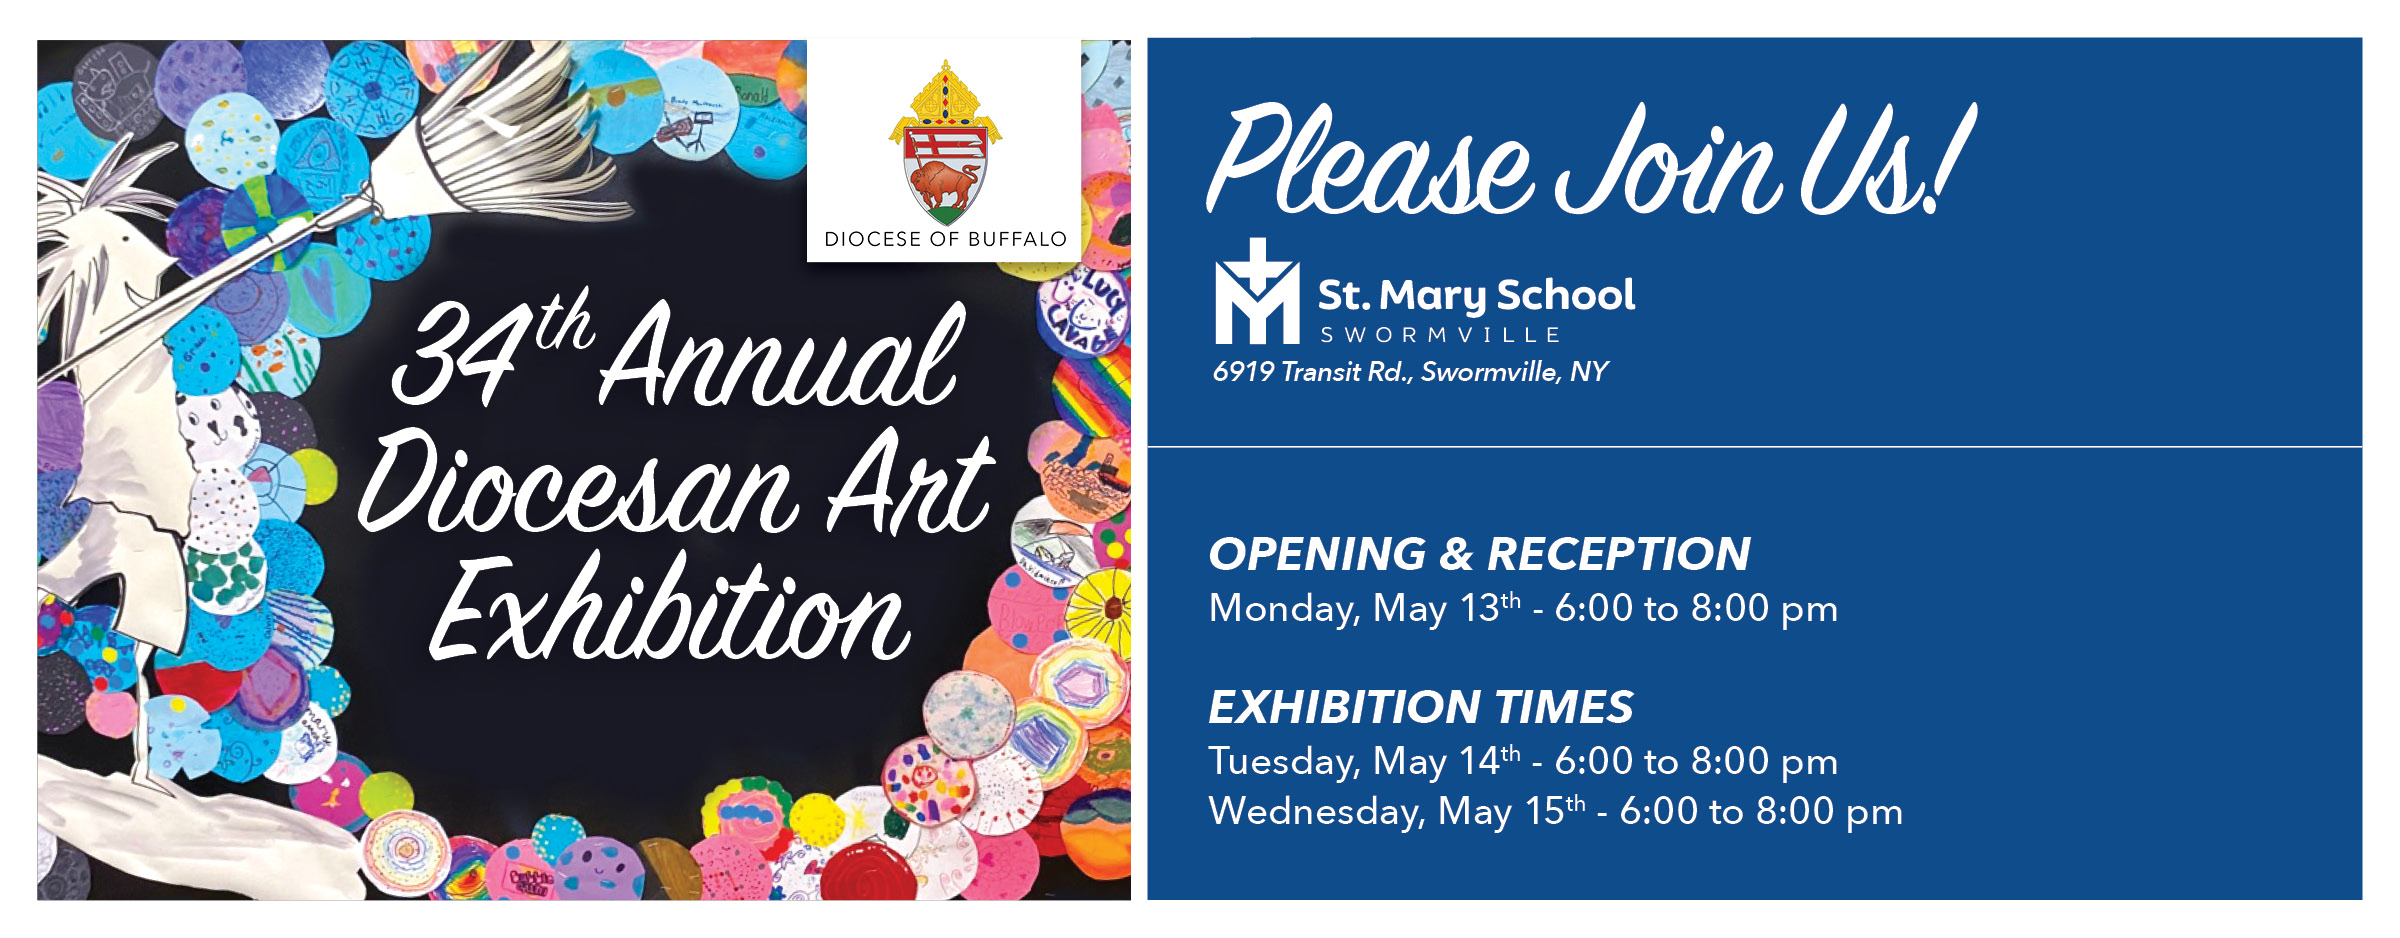 34th Annual Diocesan Art Exhibition